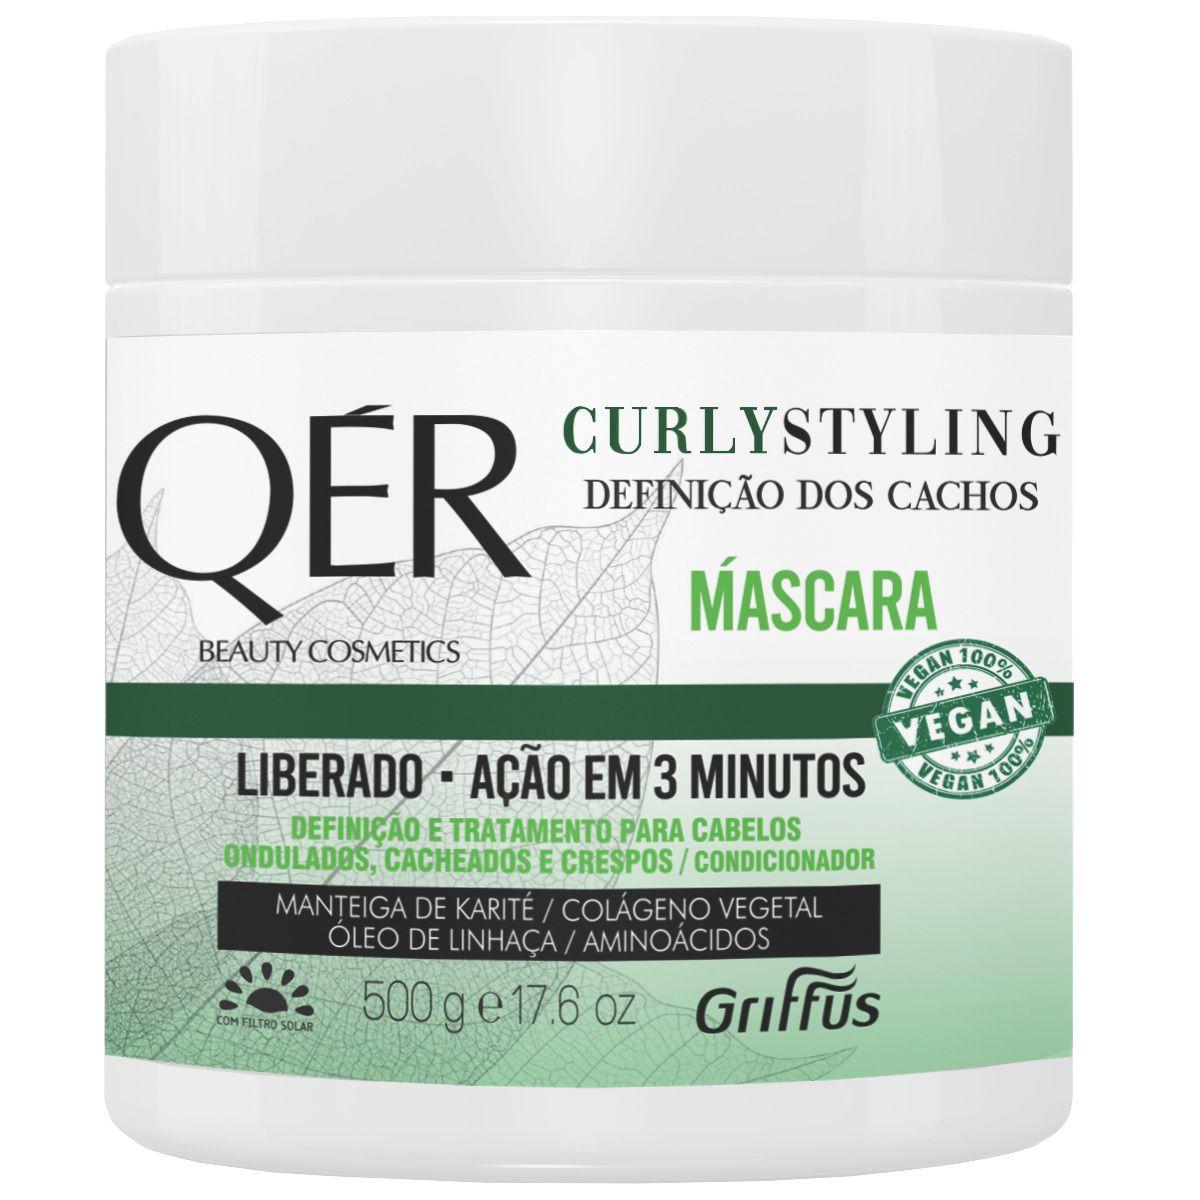 MASCARA QUERO CURLY STYL COND GRIFFUS 500G PEPS